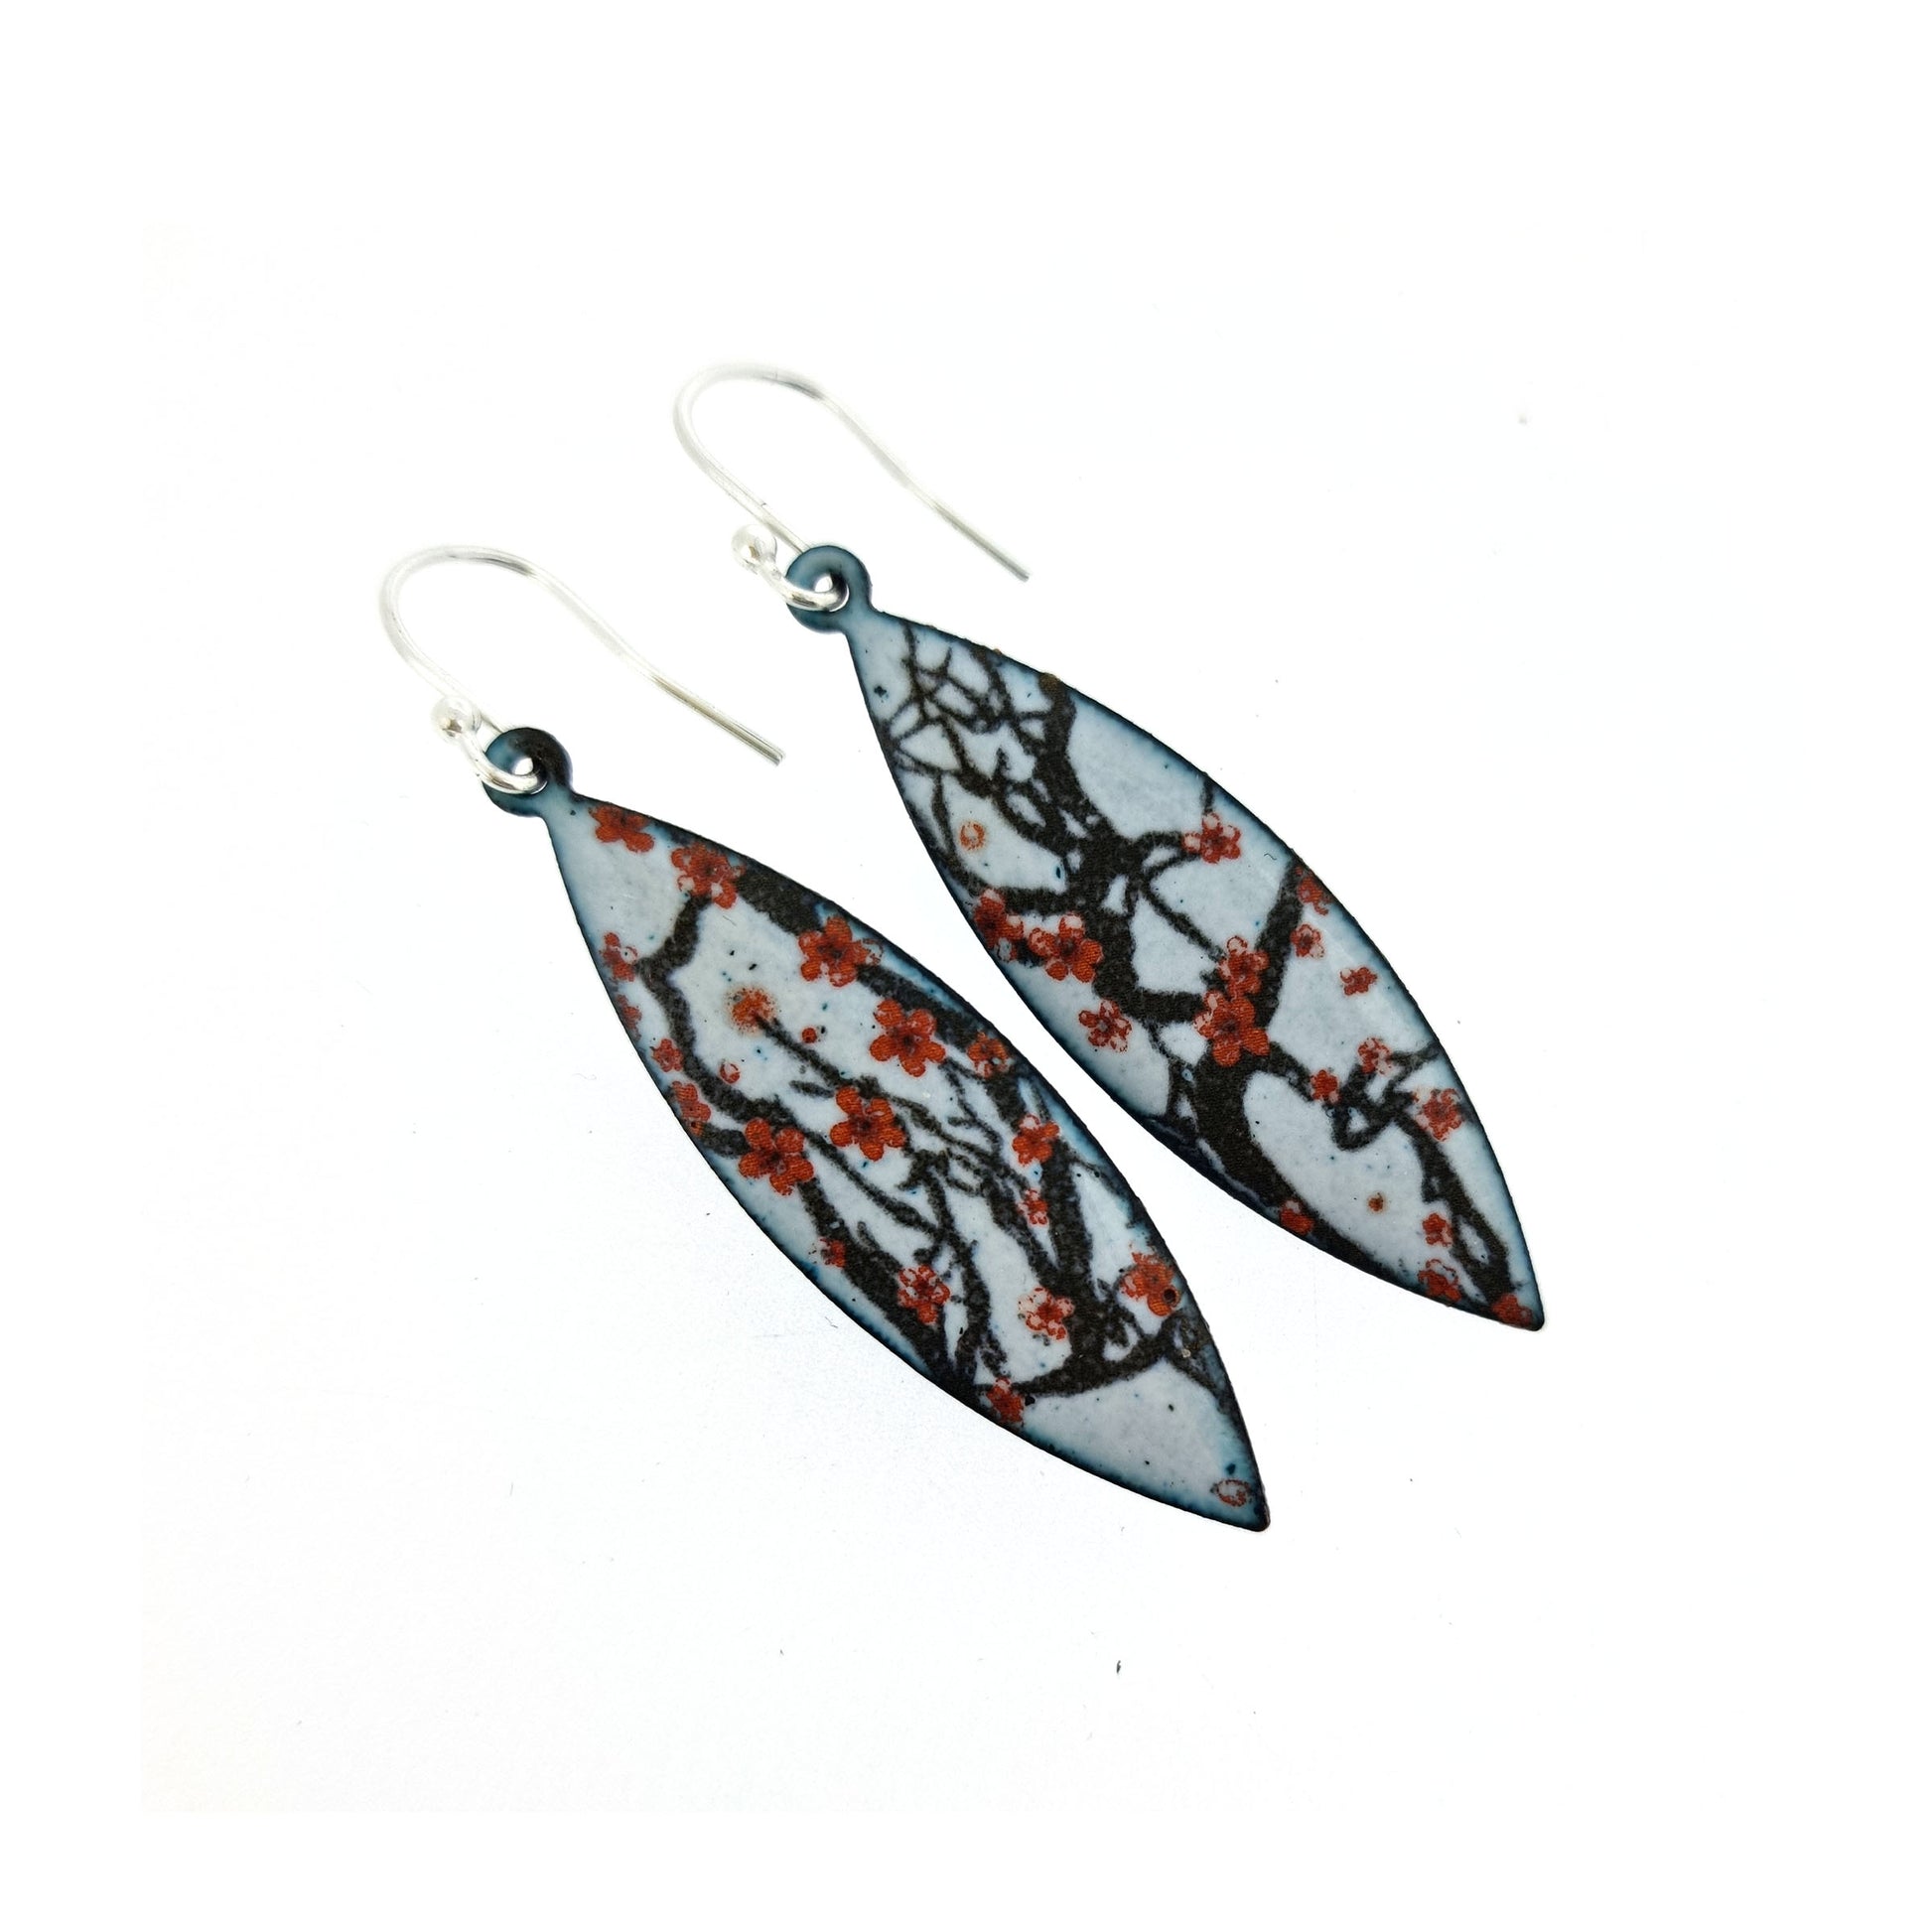 Boat-shaped enamel drop earrings with branches of red cherry blossom on a grey background.